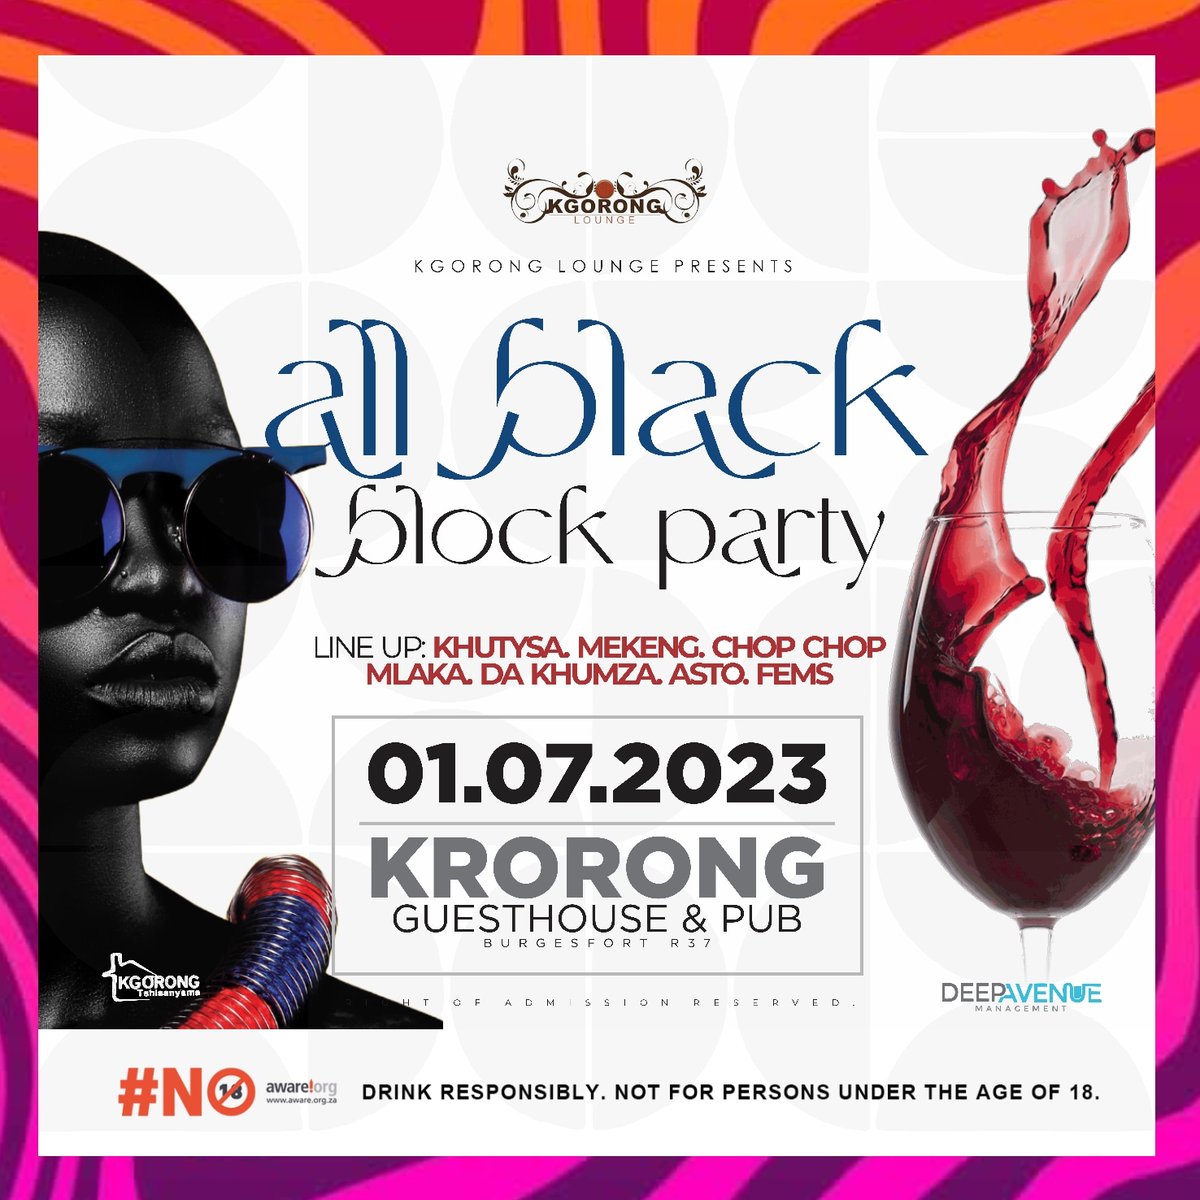 All_Black_Block_Party line up unleashed.

Let's rock🔥!!!!